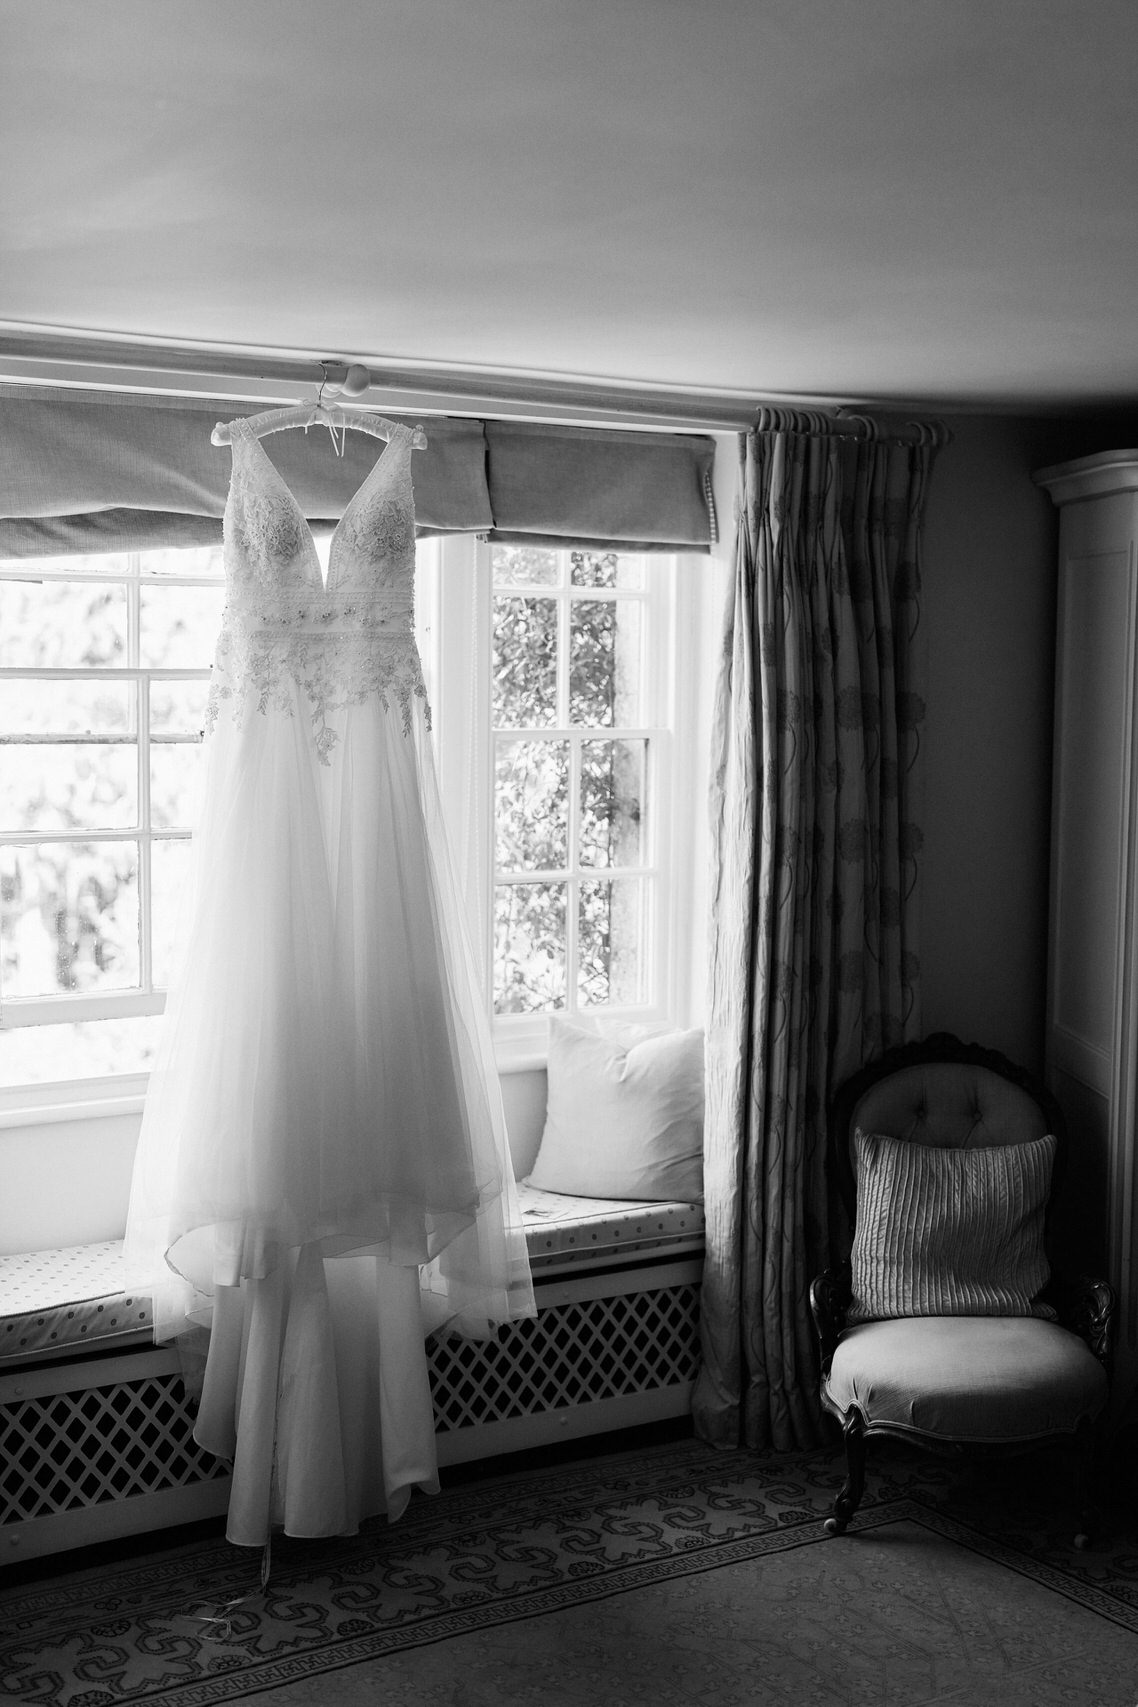 A photo in black and white showing a wedding dress hanging up near a window.